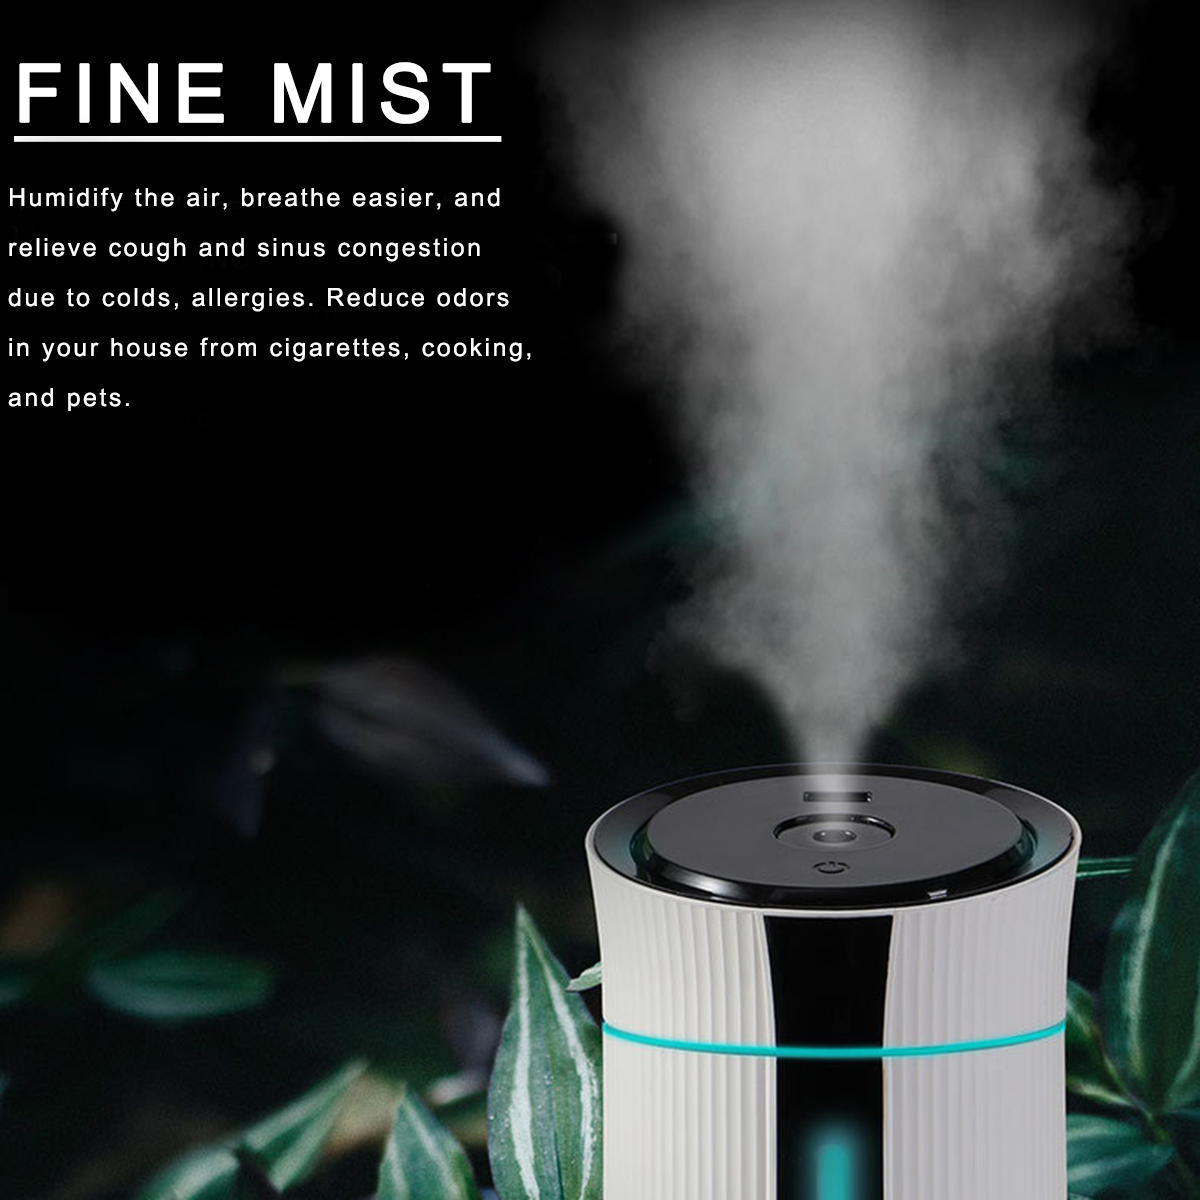 Portable-USB-Humidifier-2-Gear-Spray-Mode-Air-Diffuser-Purifier-Cool-Mist-Colorful-LED-Night-Light-L-1835241-2